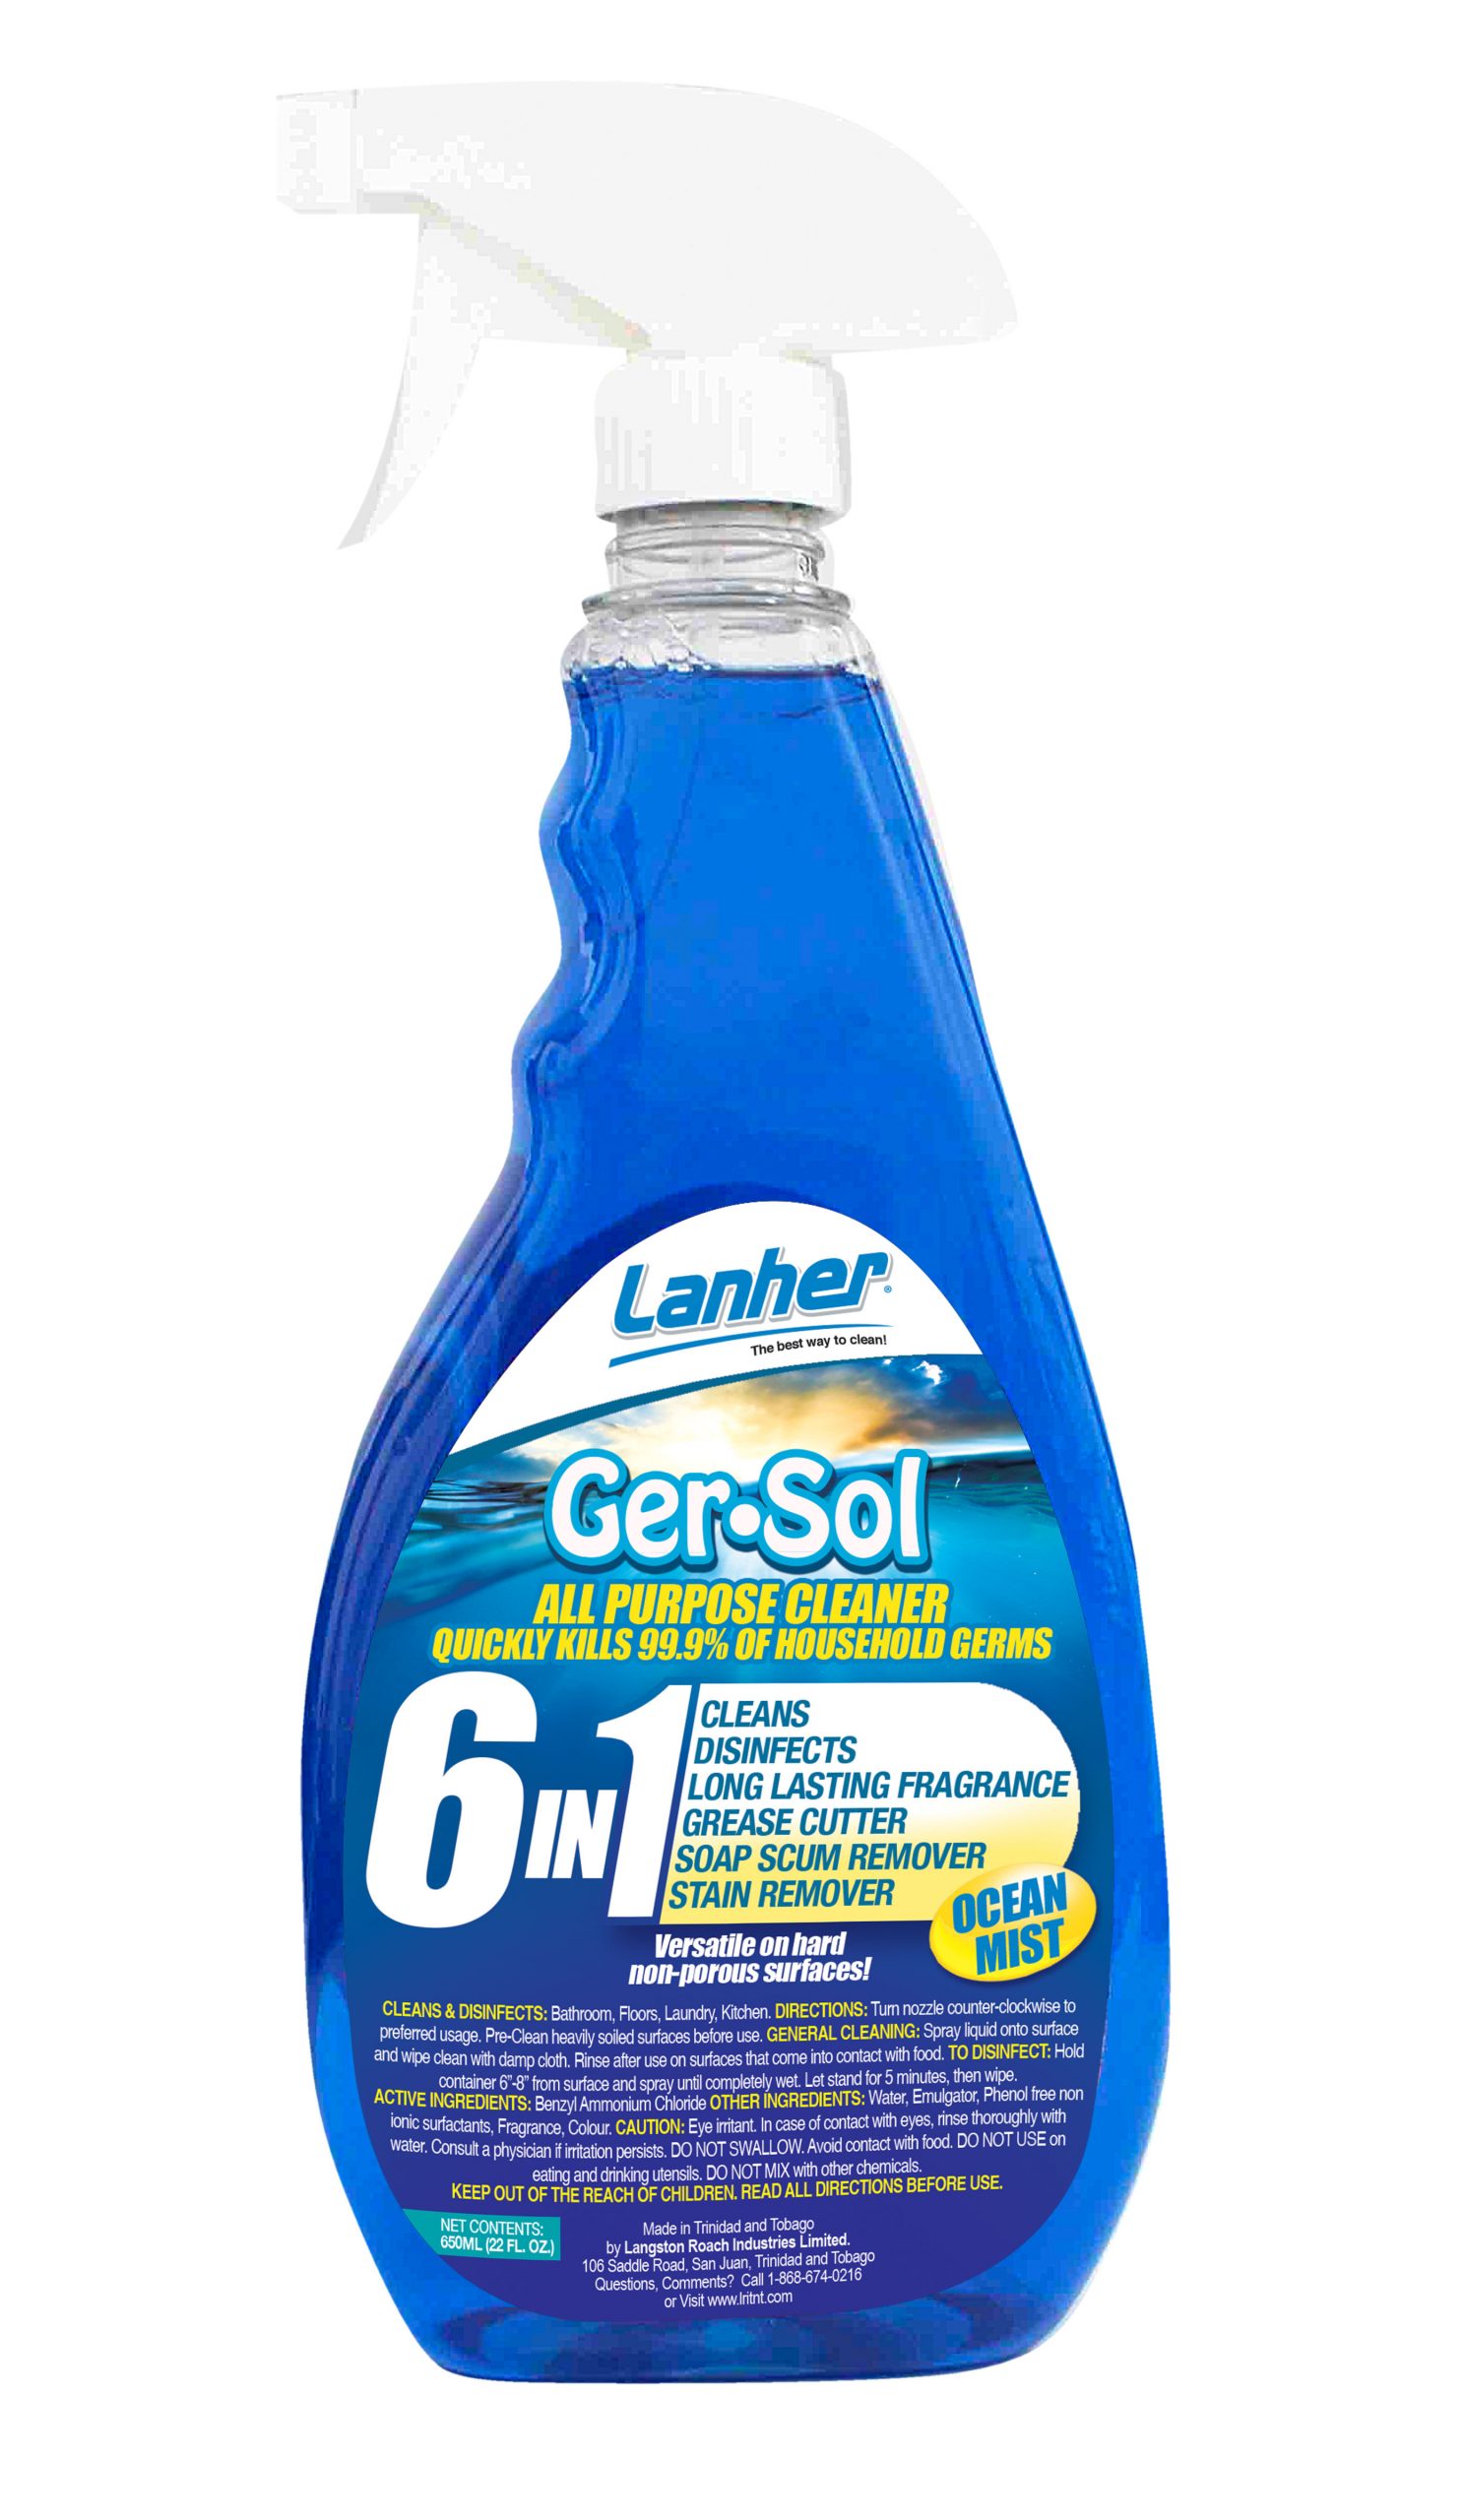 Lanher Gersol 6 in 1 All Purpose Cleaner – Langston Roach Industries Limited